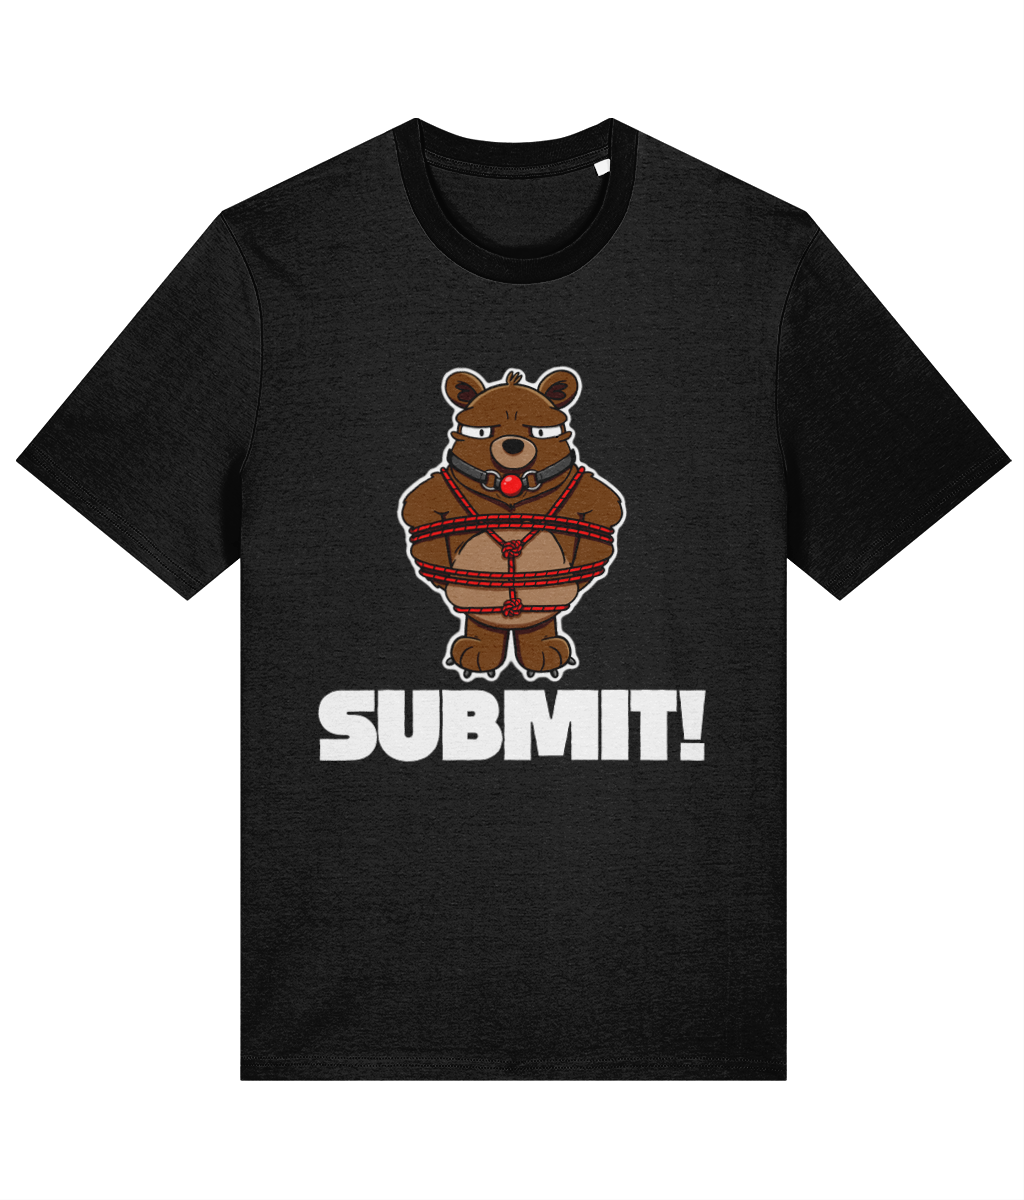 Submit! T-Shirt